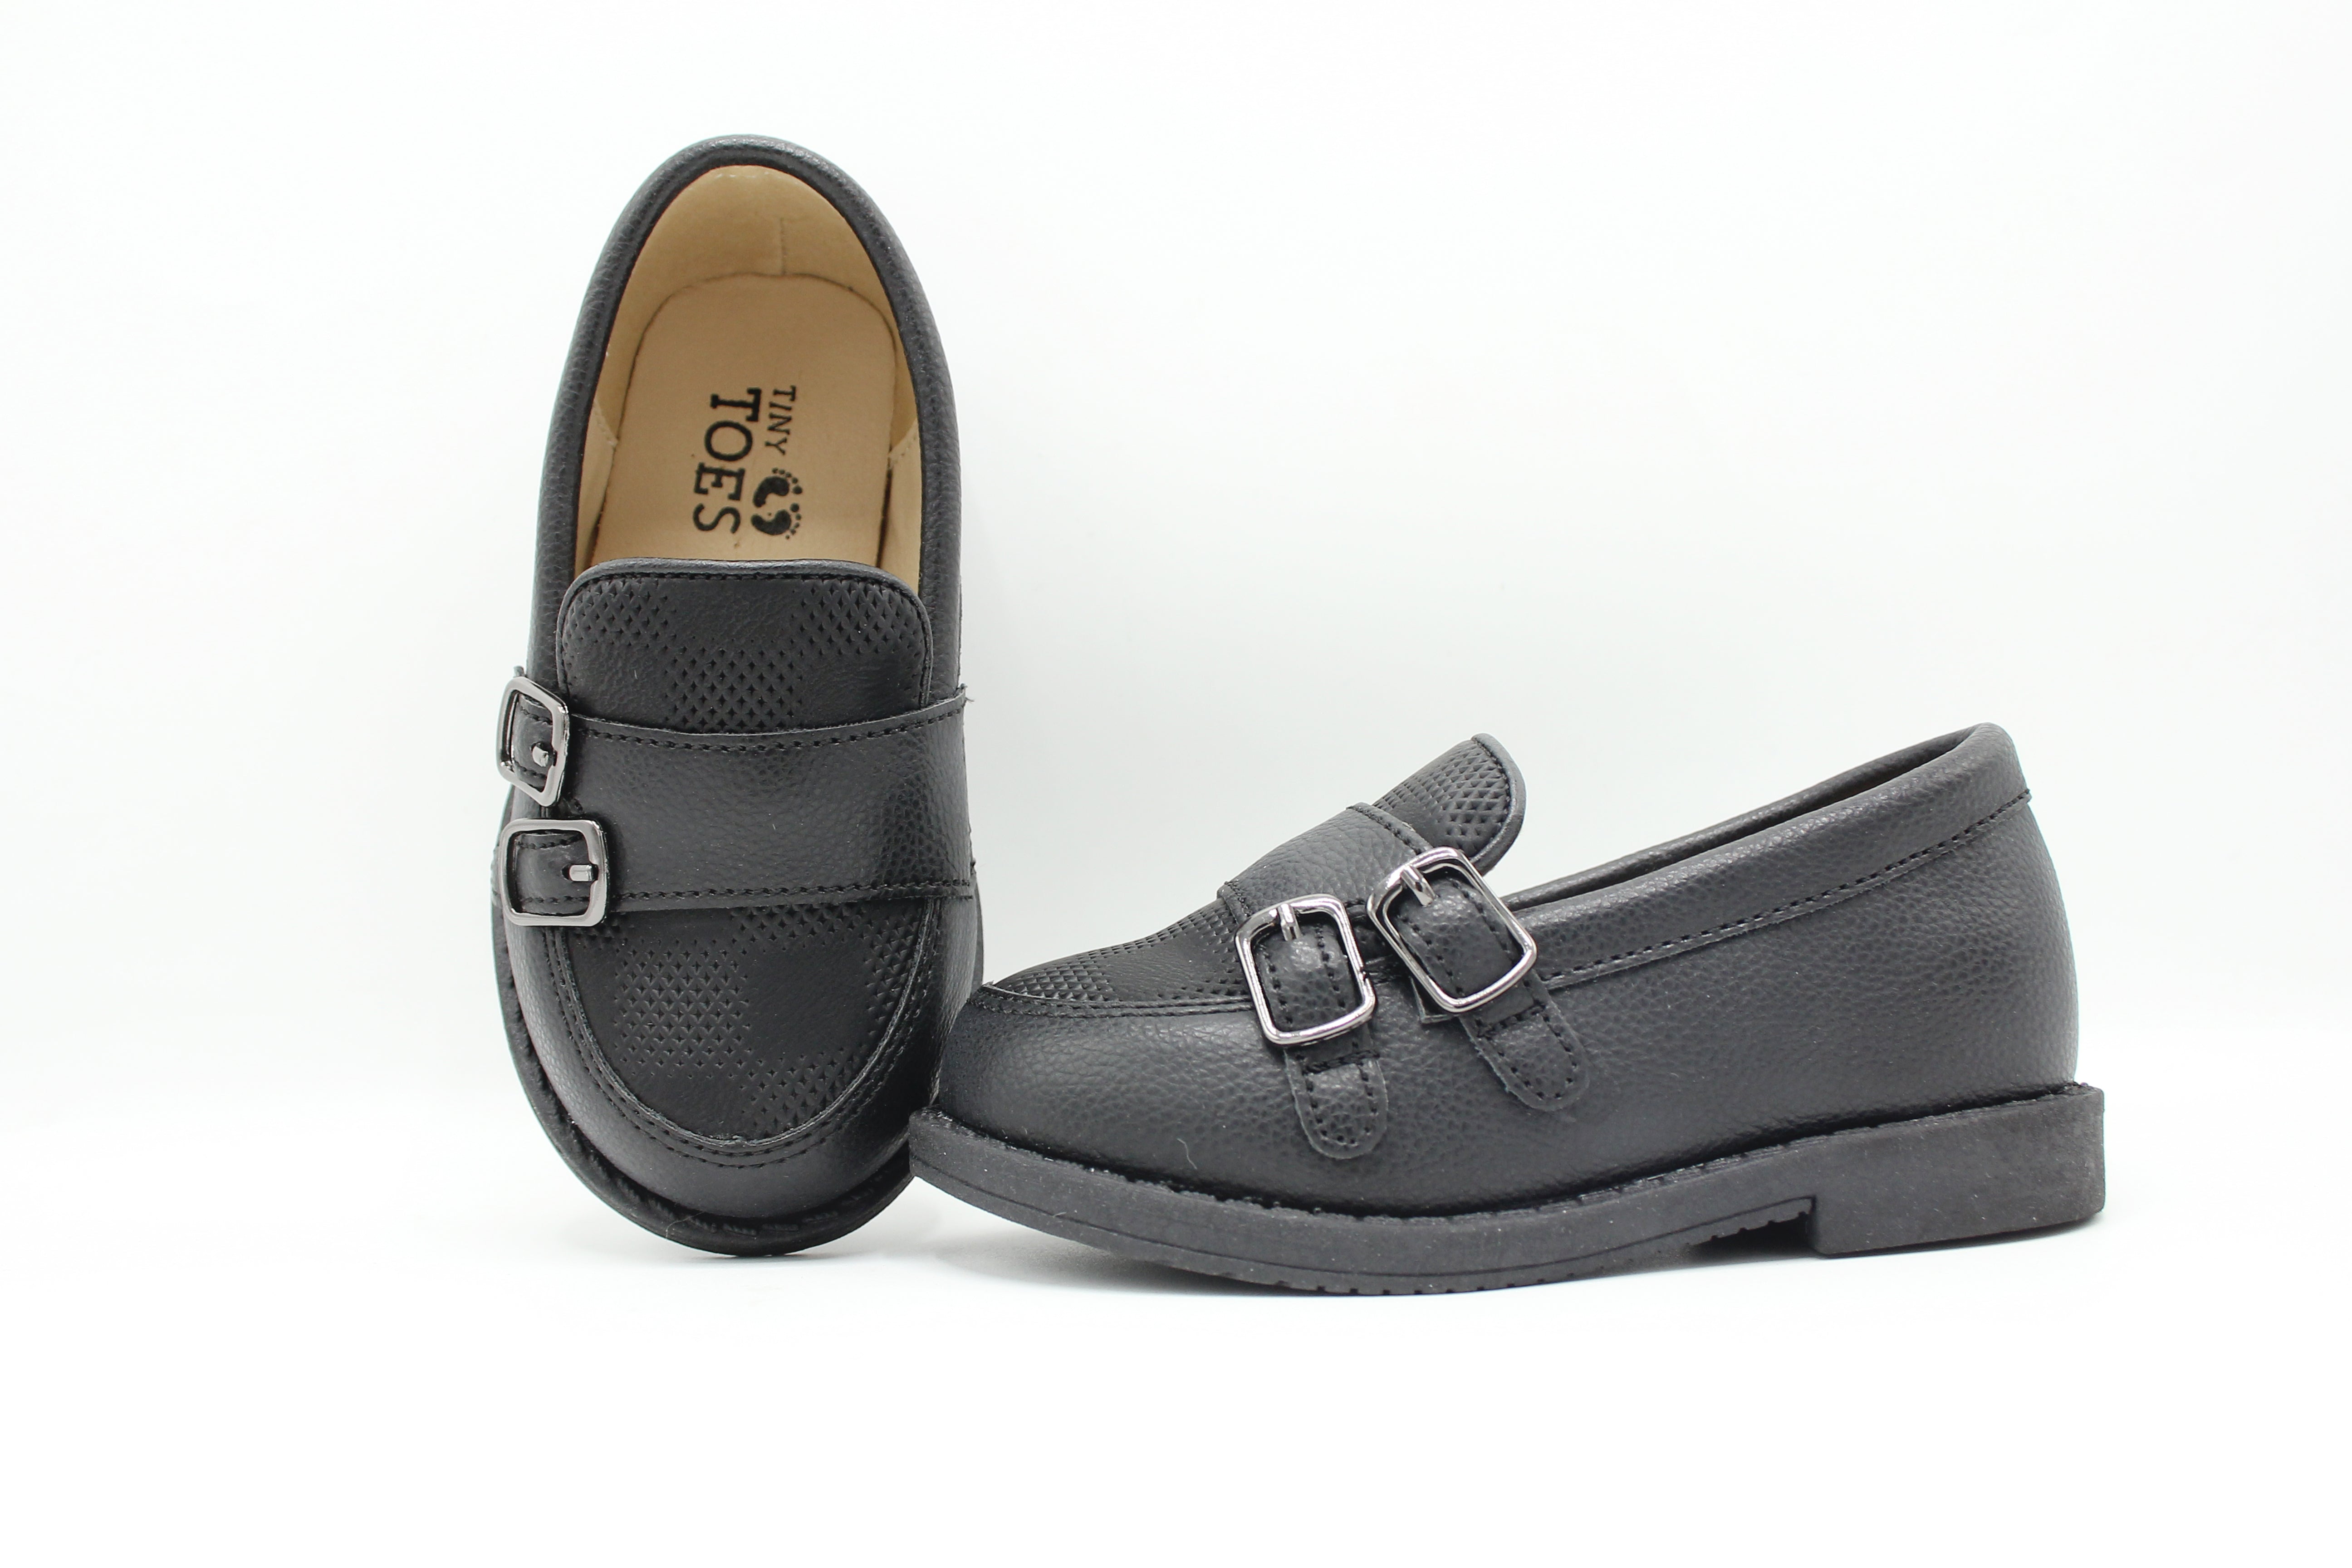 BABY BOY FORMAL LOAFERS - 31353